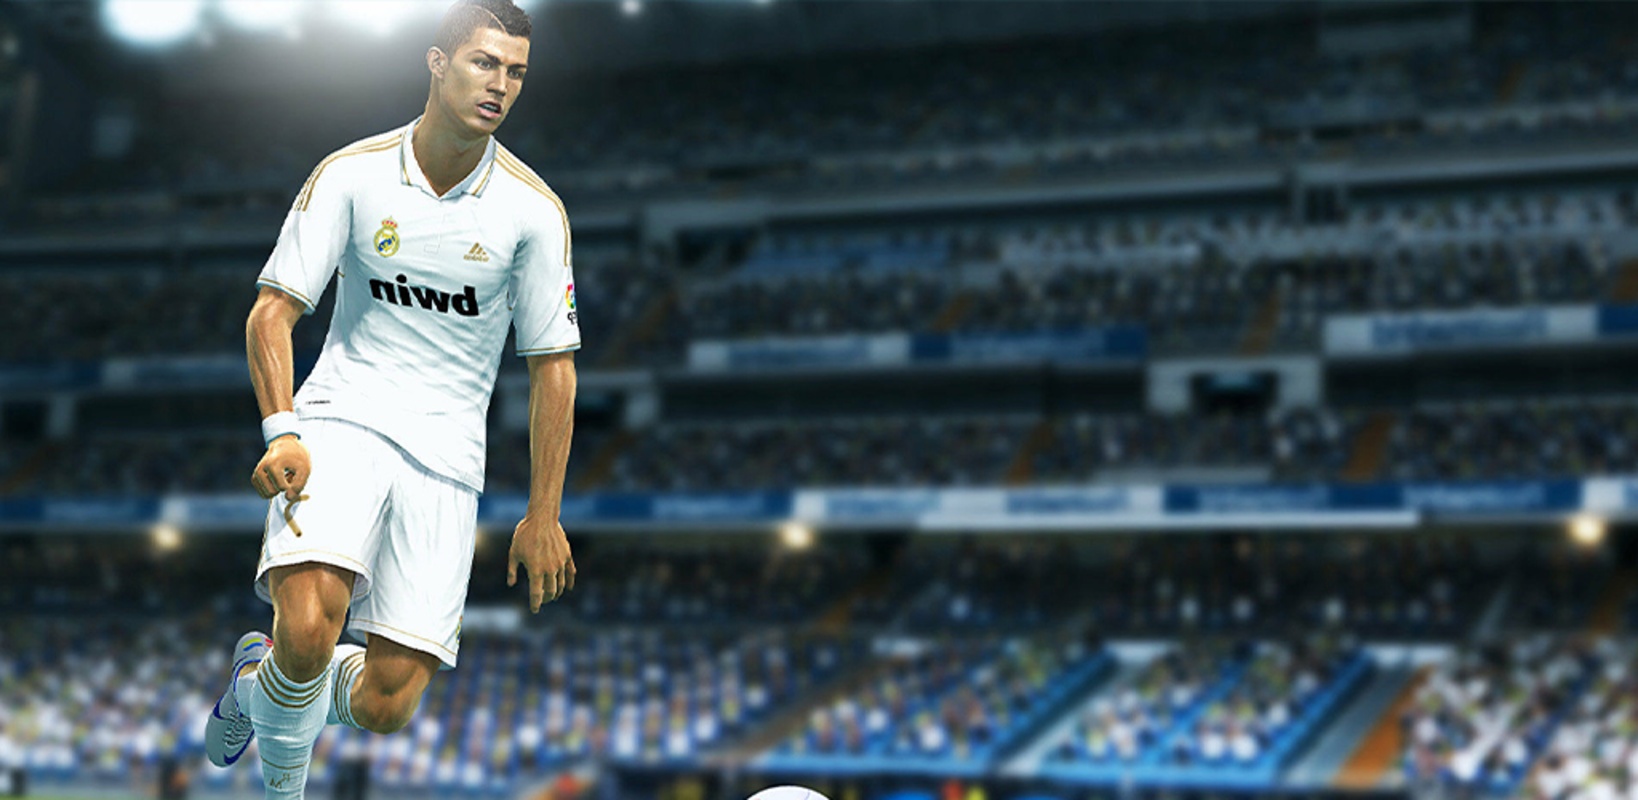 PES 2013 Demo feature